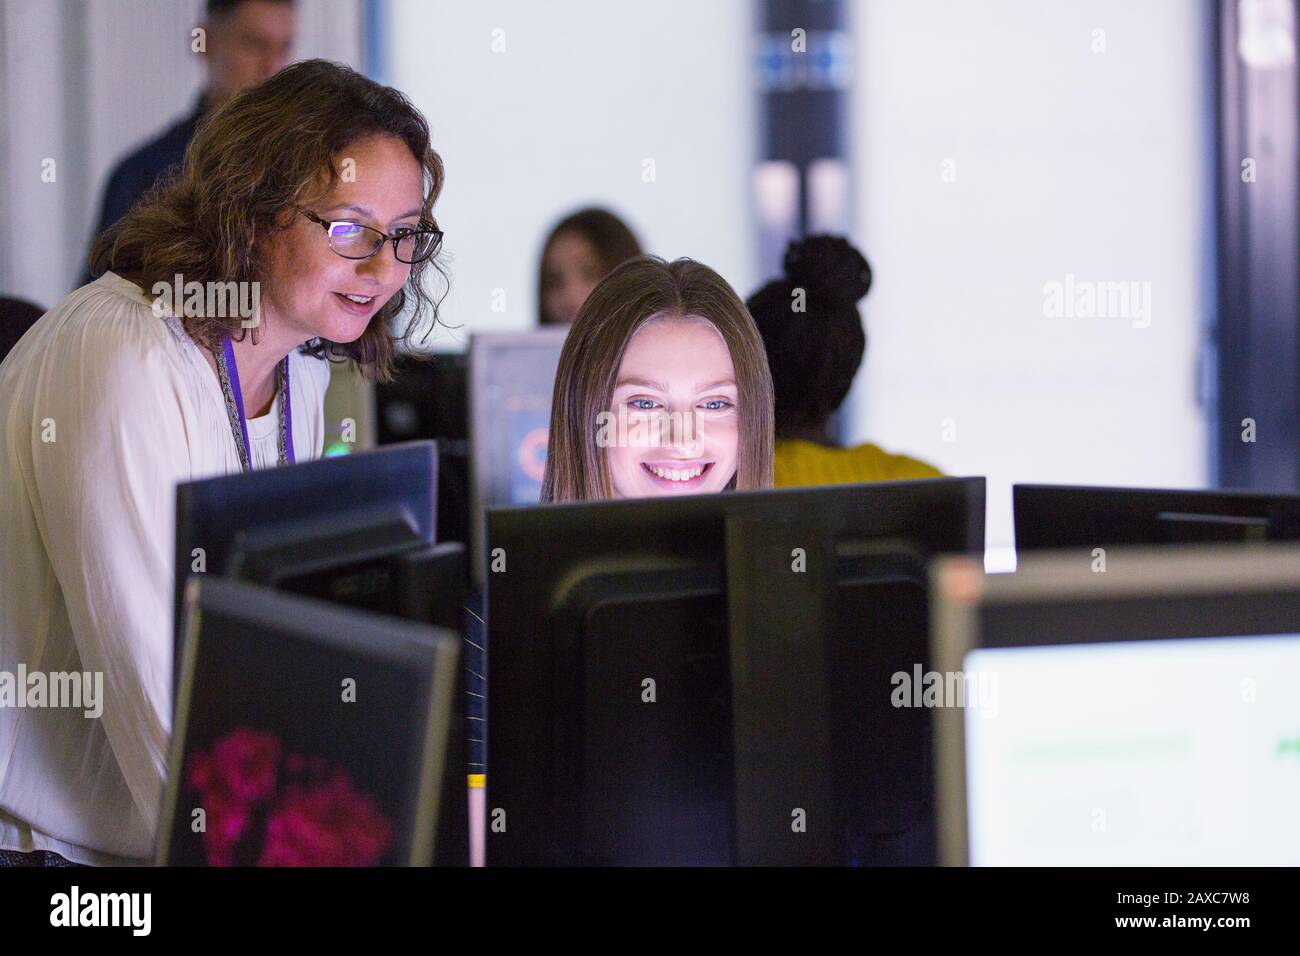 Female junior high teacher helping girl student at computer in computer lab Stock Photo